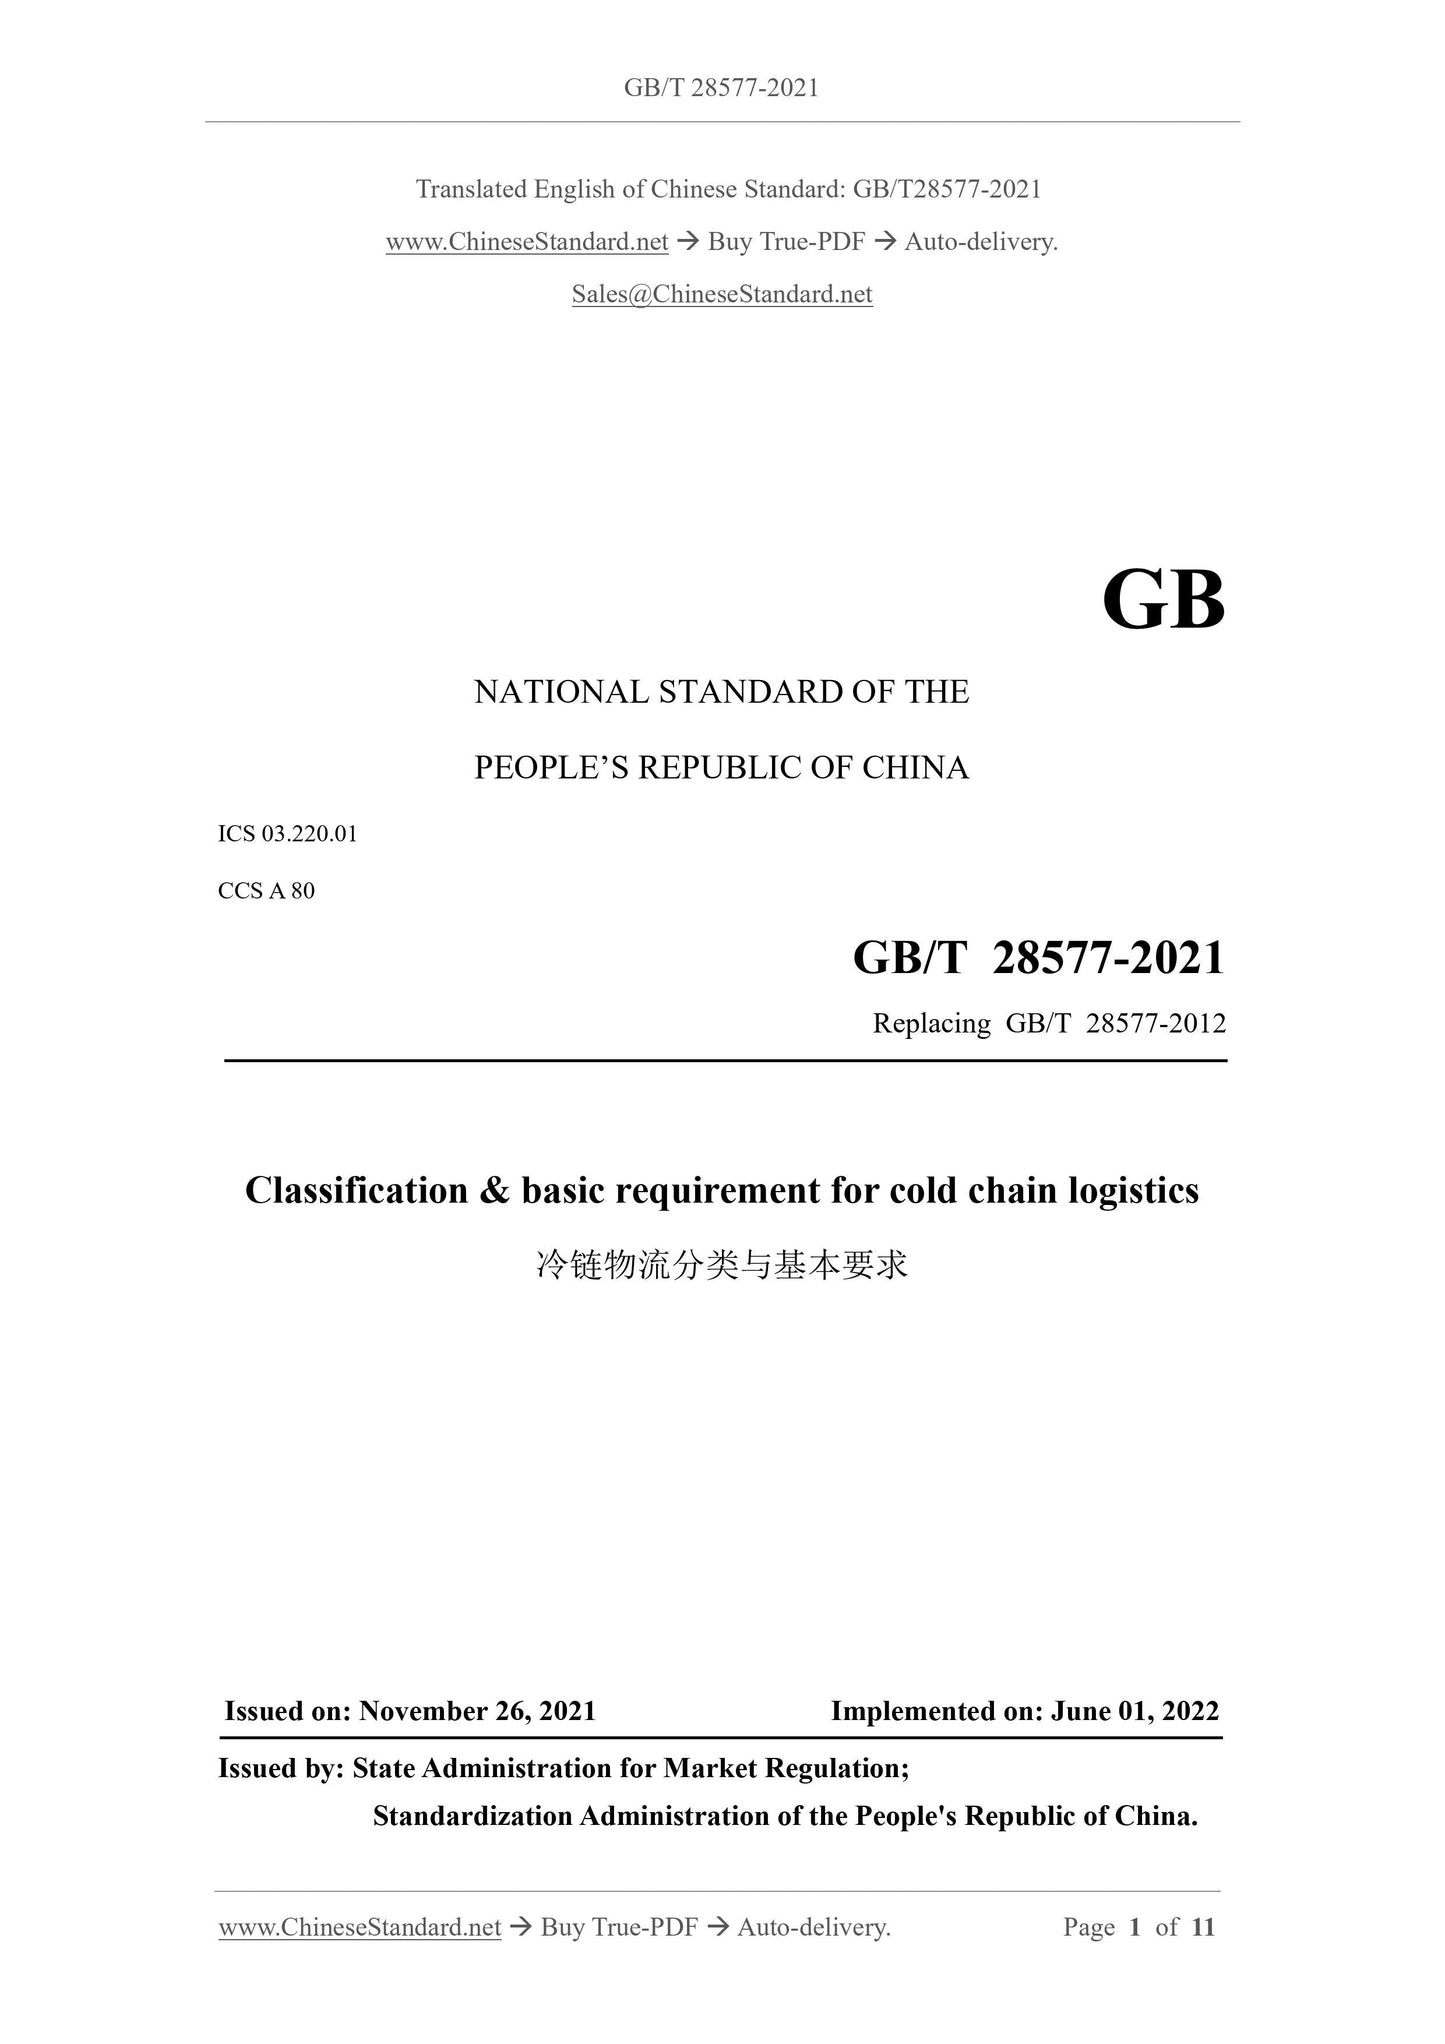 GB/T 28577-2021 Page 1